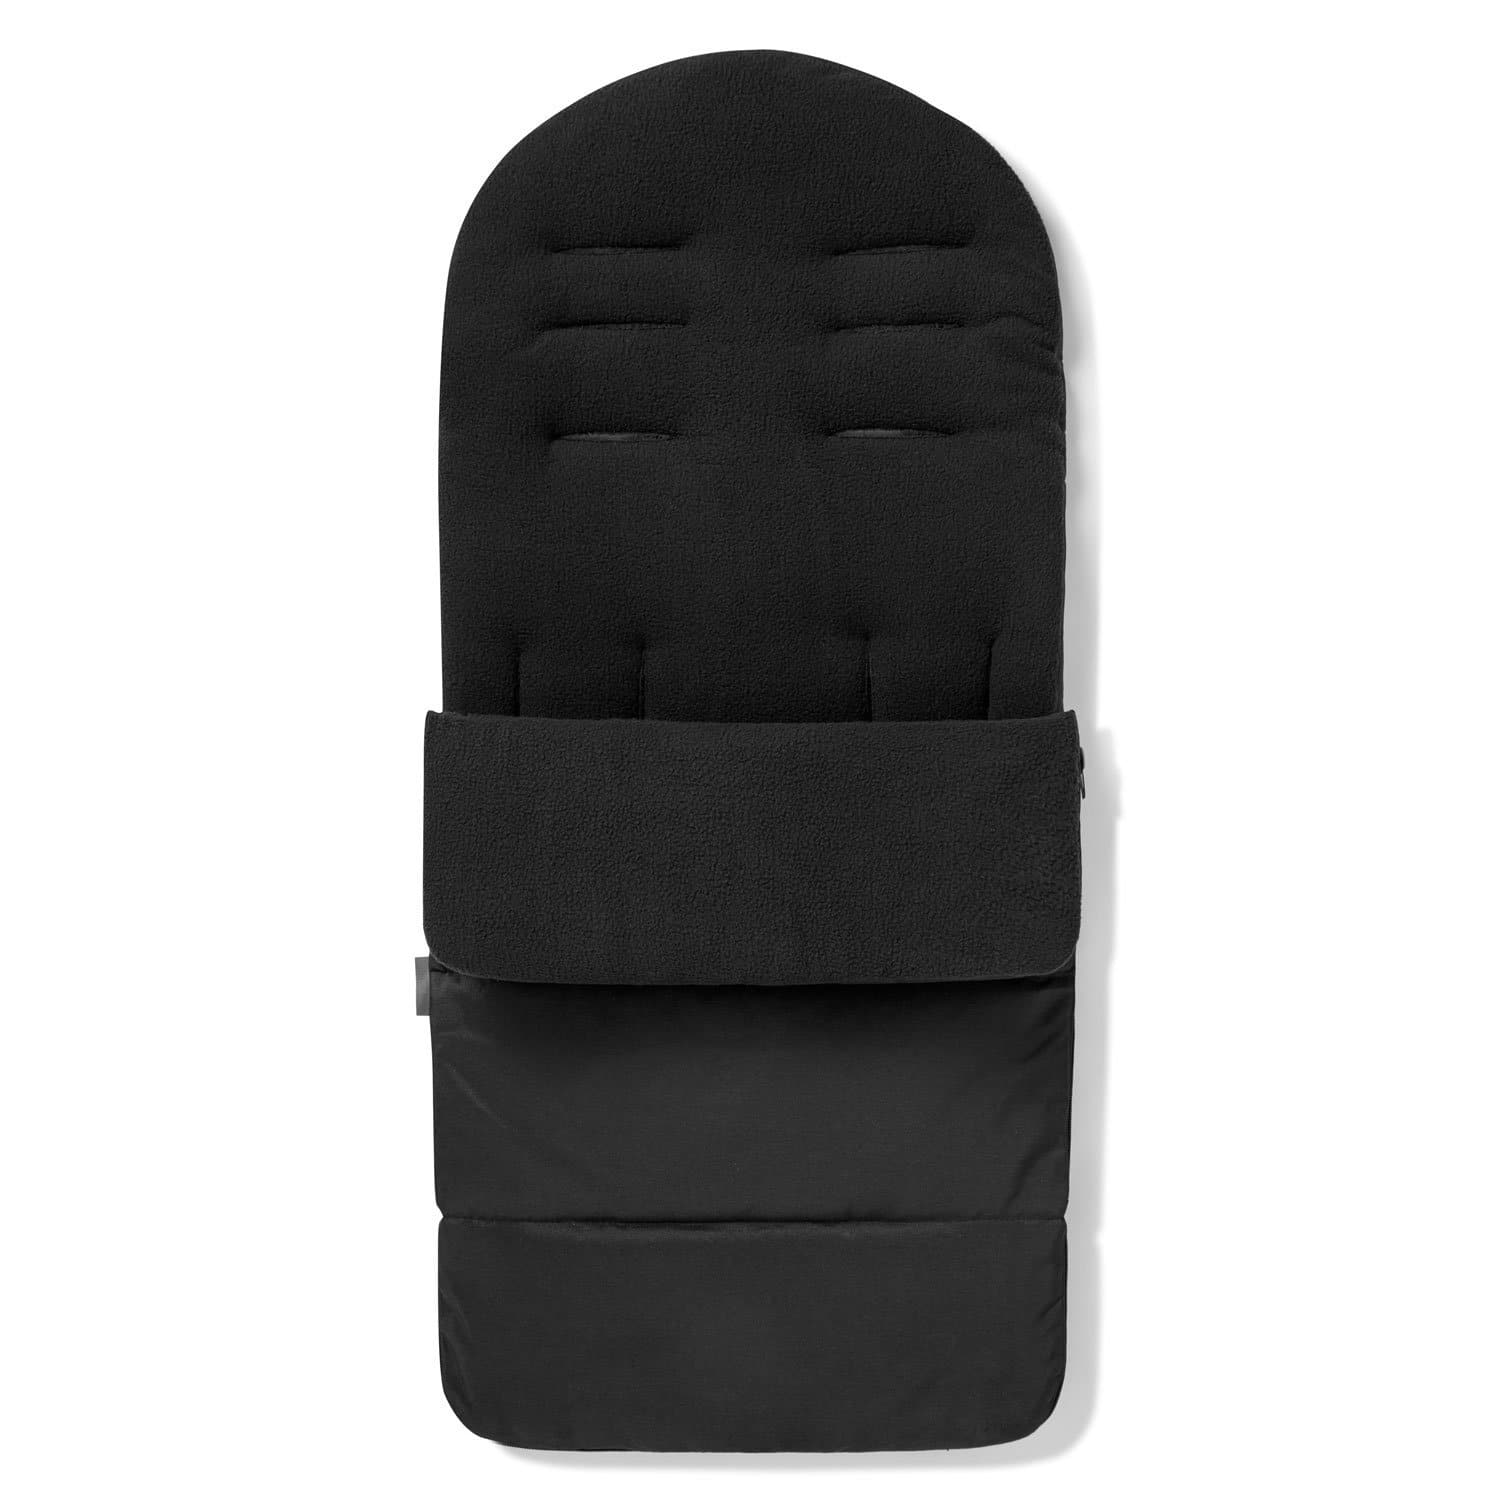 Premium Footmuff / Cosy Toes Compatible with BabyDan - Black Jack / Fits All Models | For Your Little One